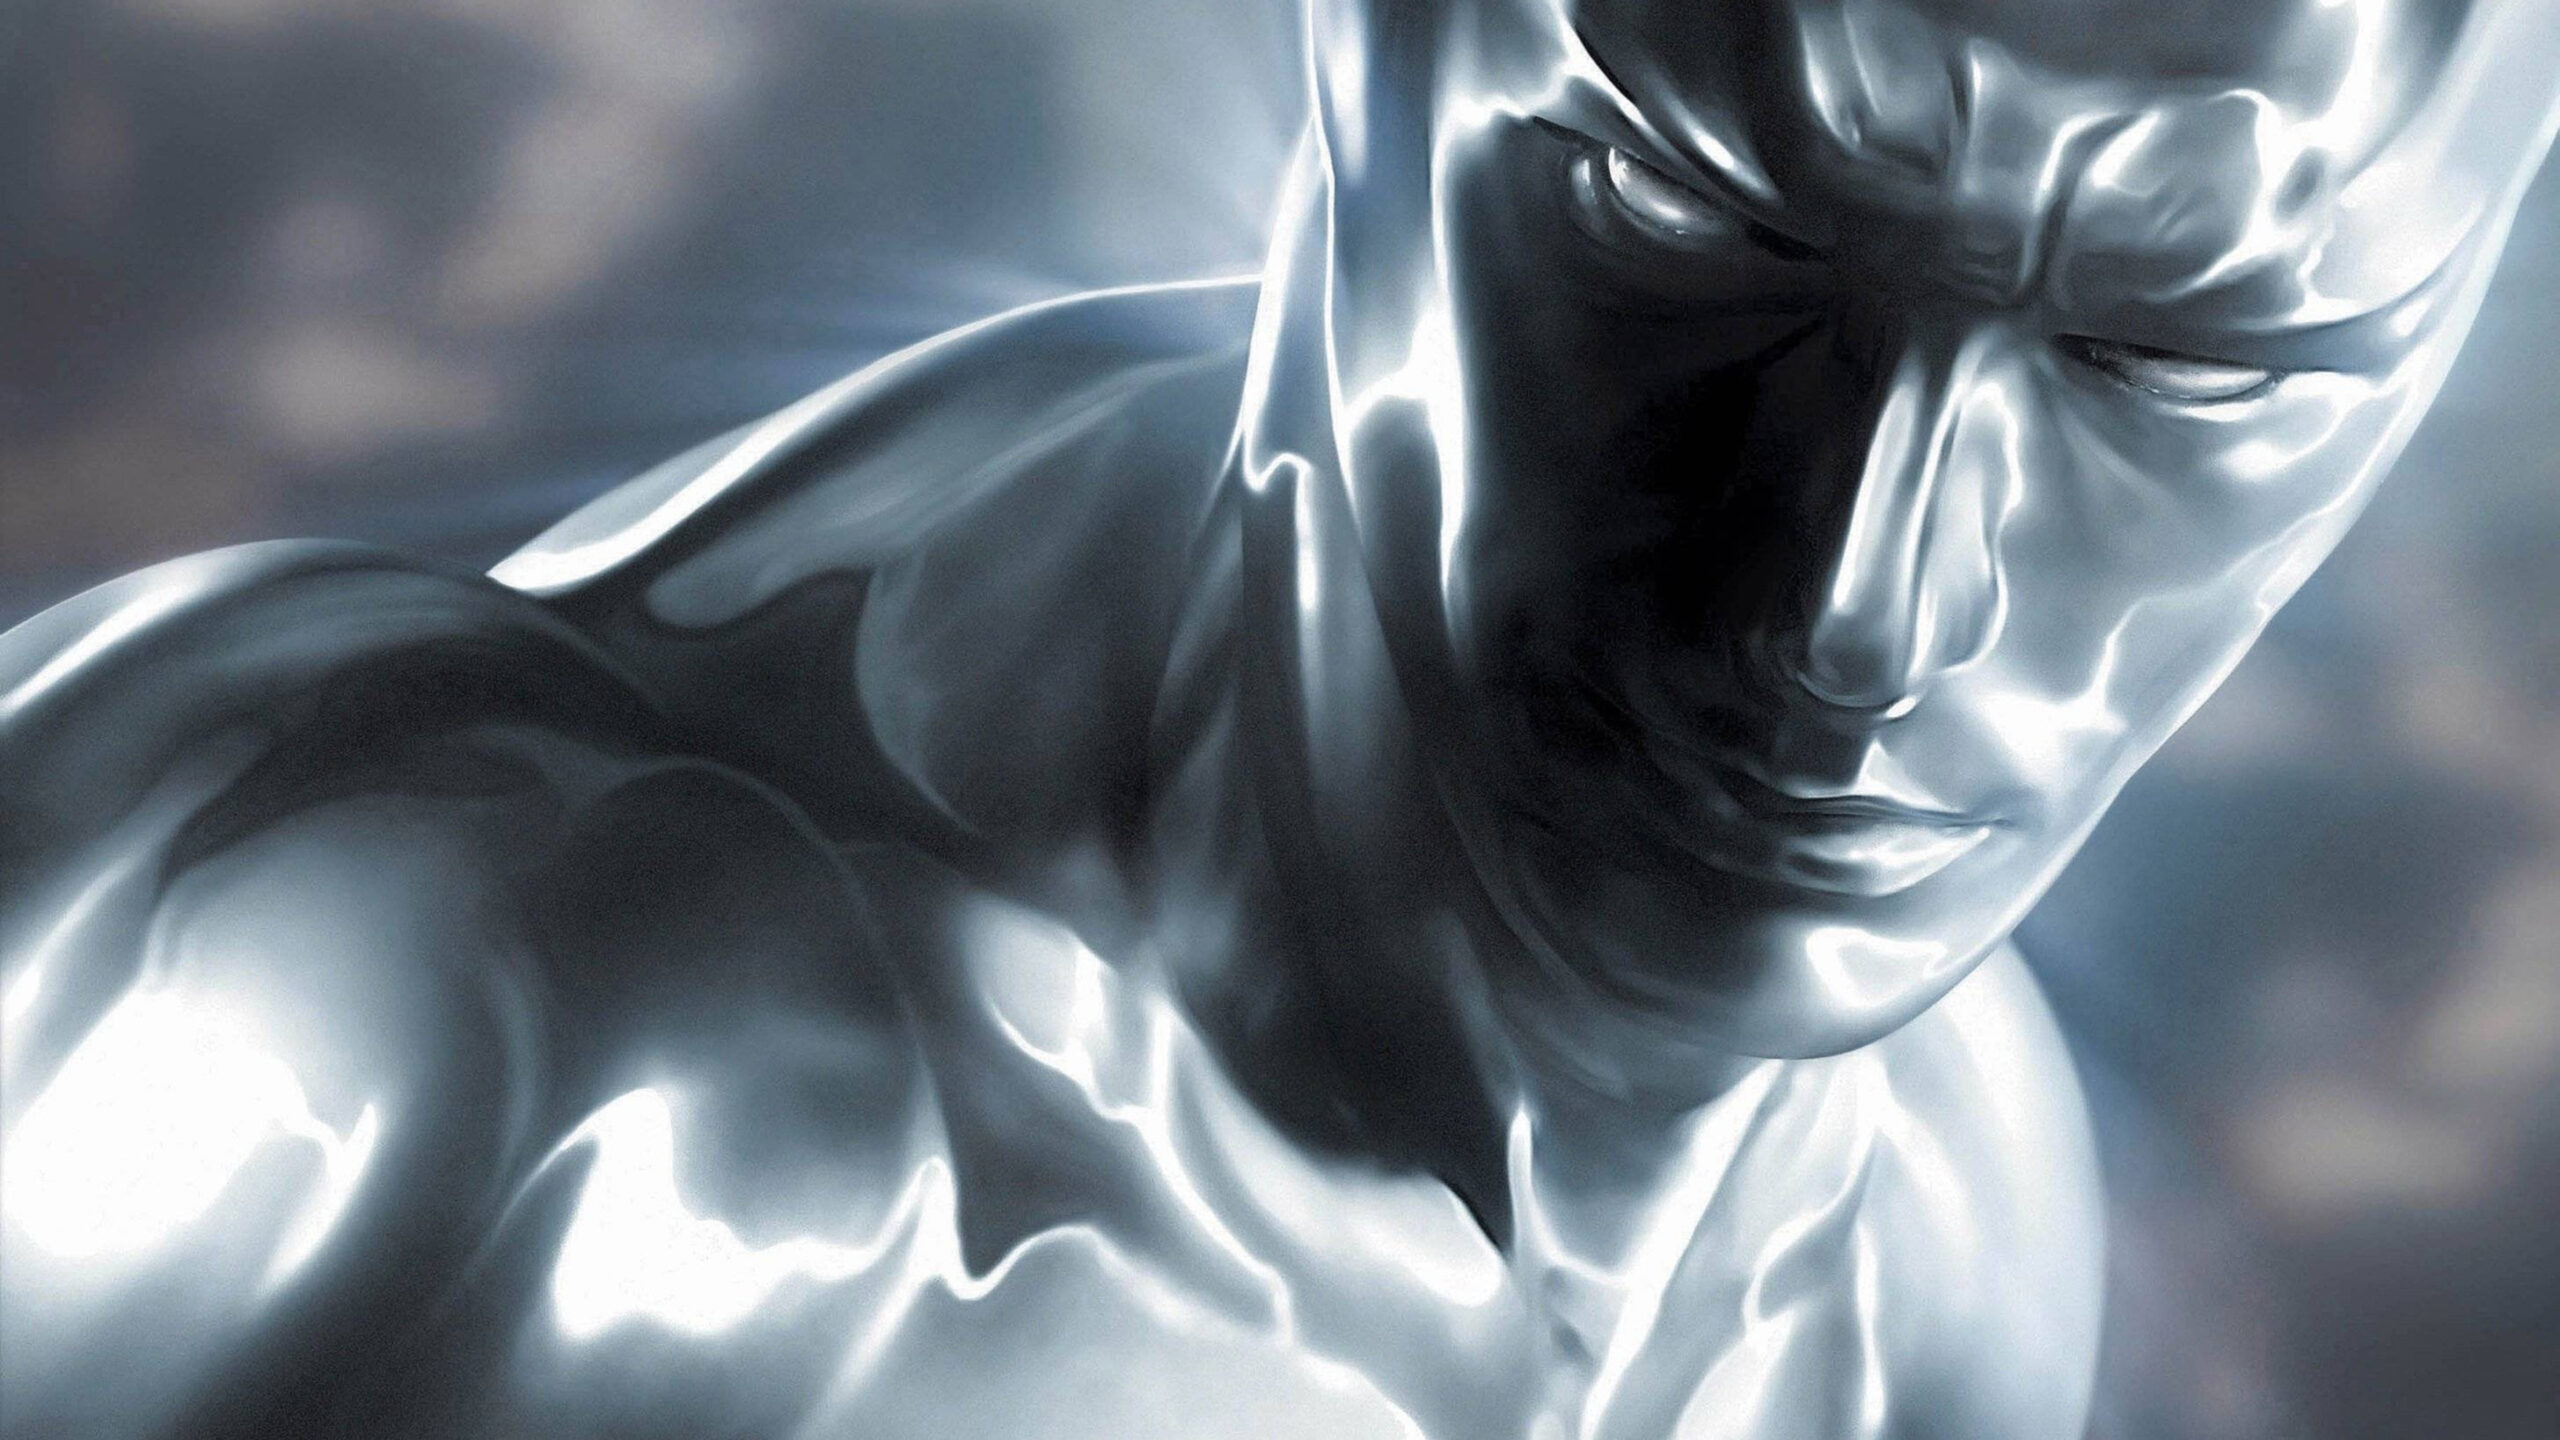 Disney Plus Gives The Silver Surfer His Own Special - Geekosity